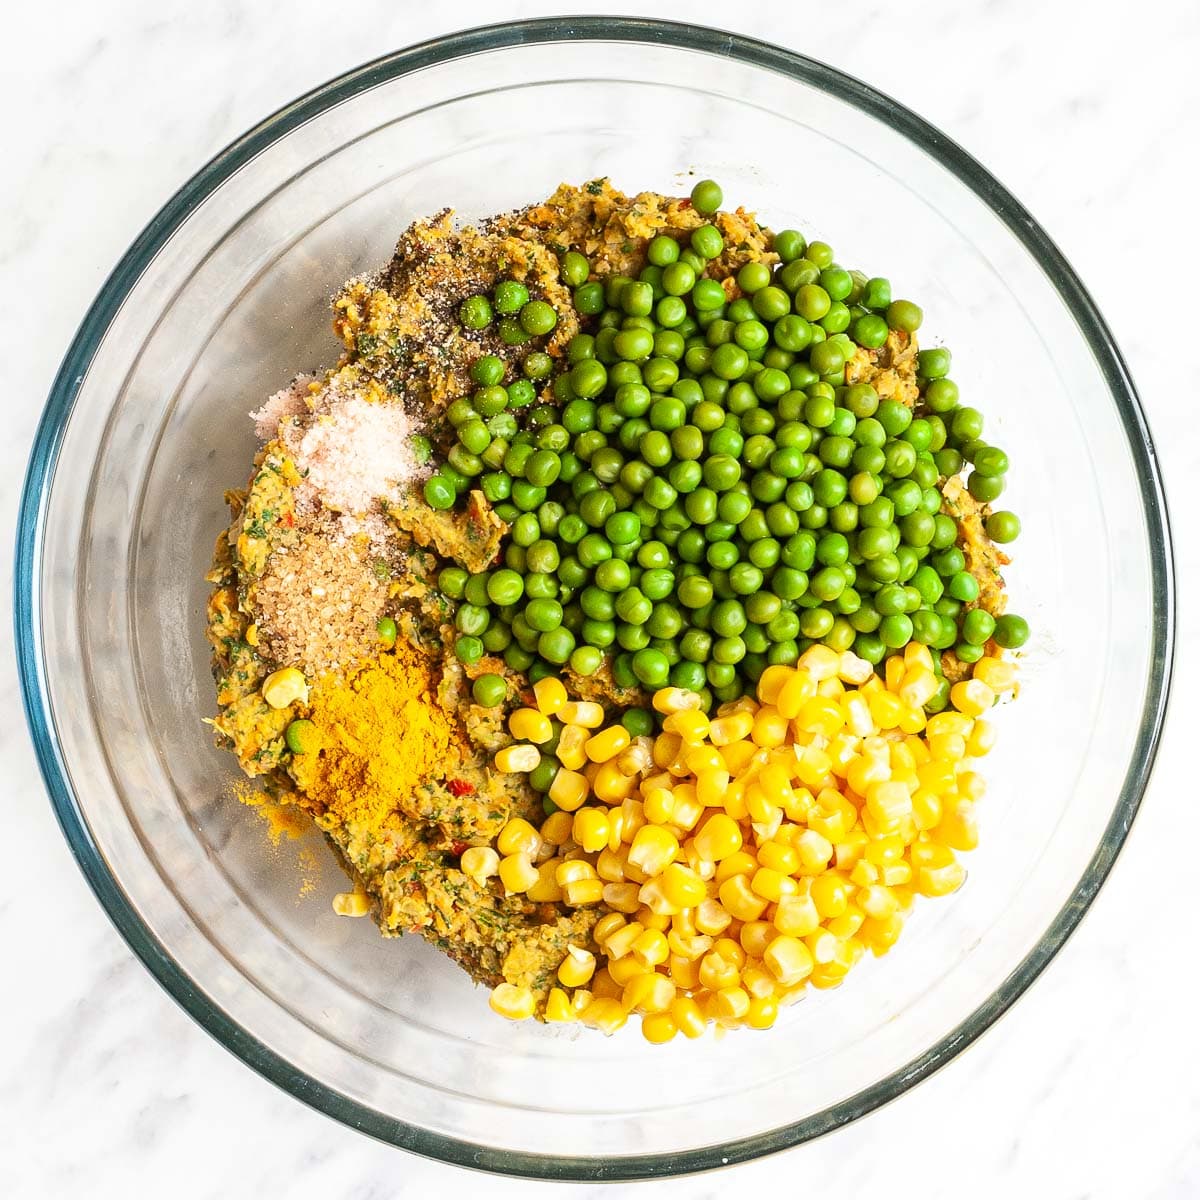 Glass bowl with corn, green peas, spices and crumbly veggie puree